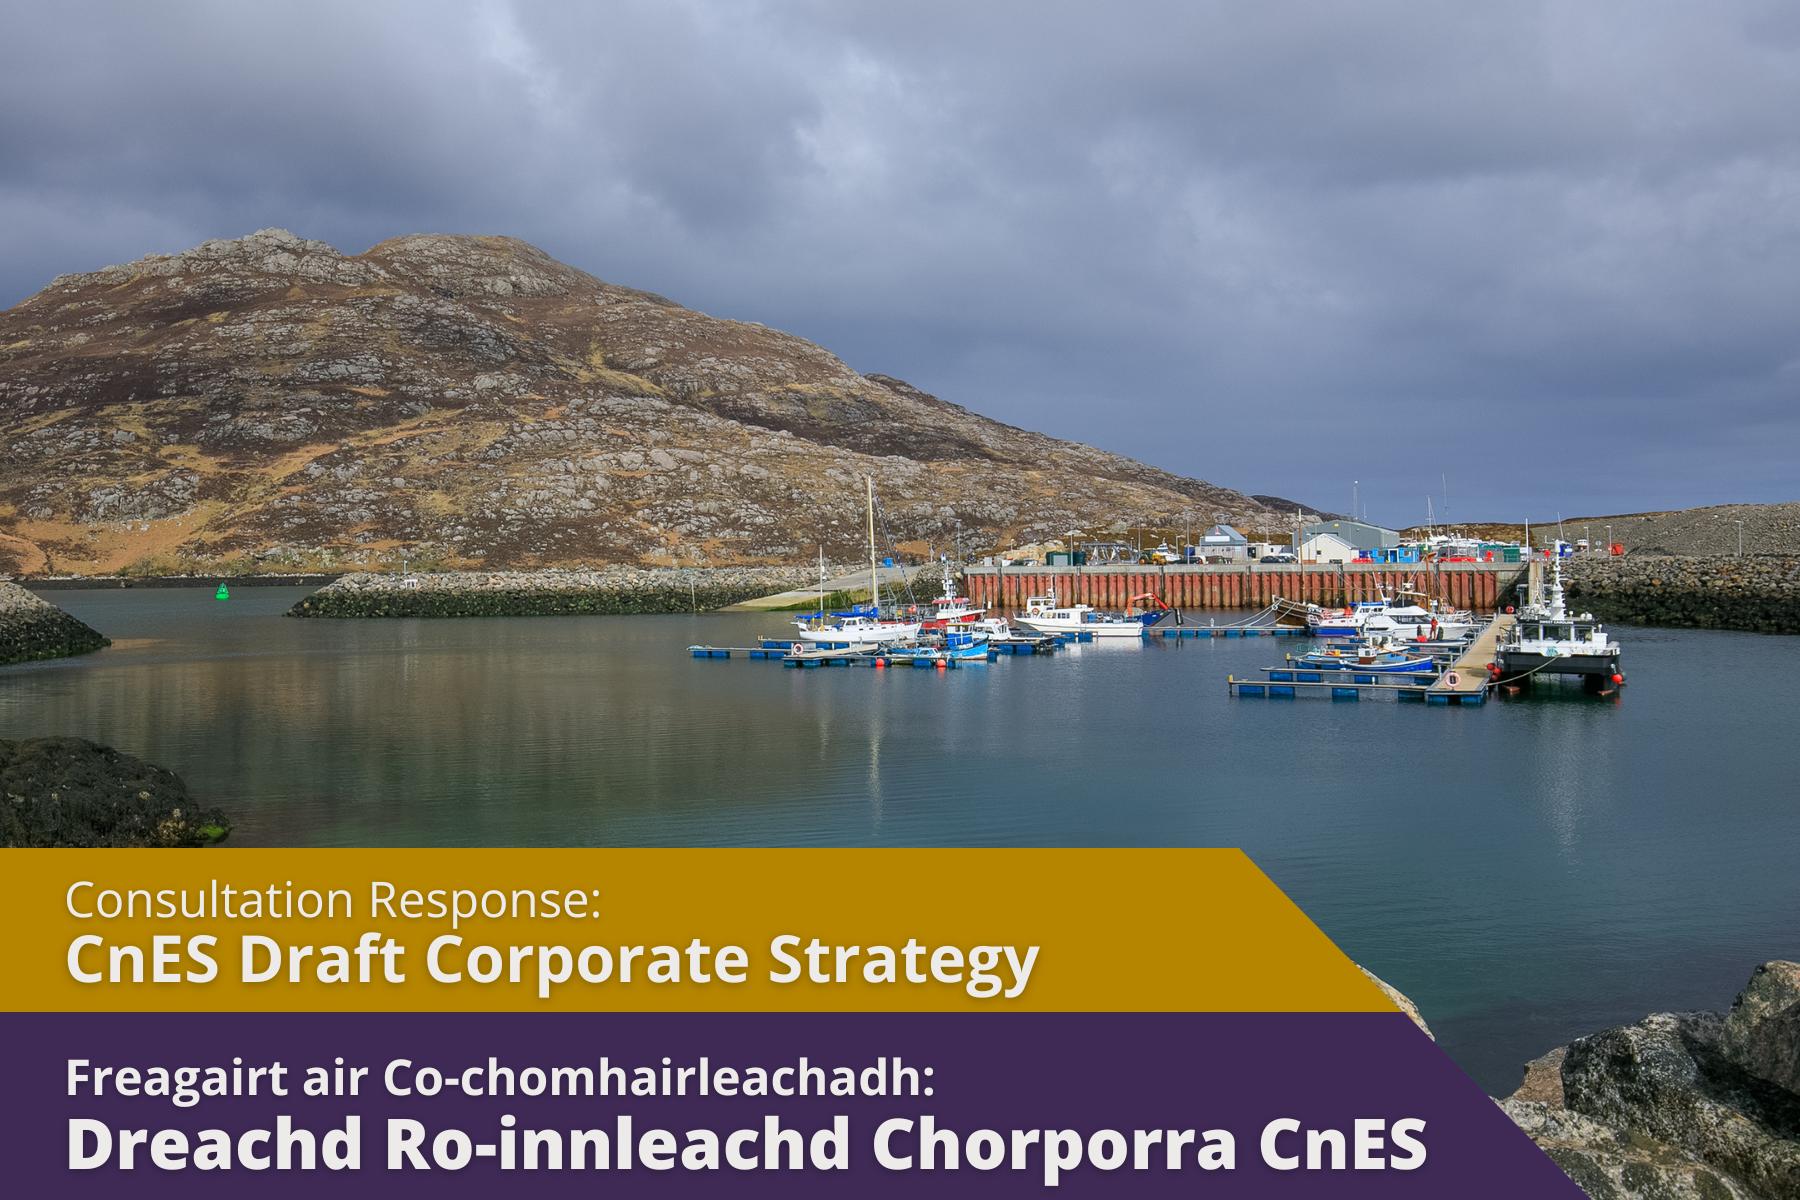 Picture: Boats at pontoons in the Western Isles with text over picture. Text reads 'Consultation Response: CnES Draft Corporate Strategy'